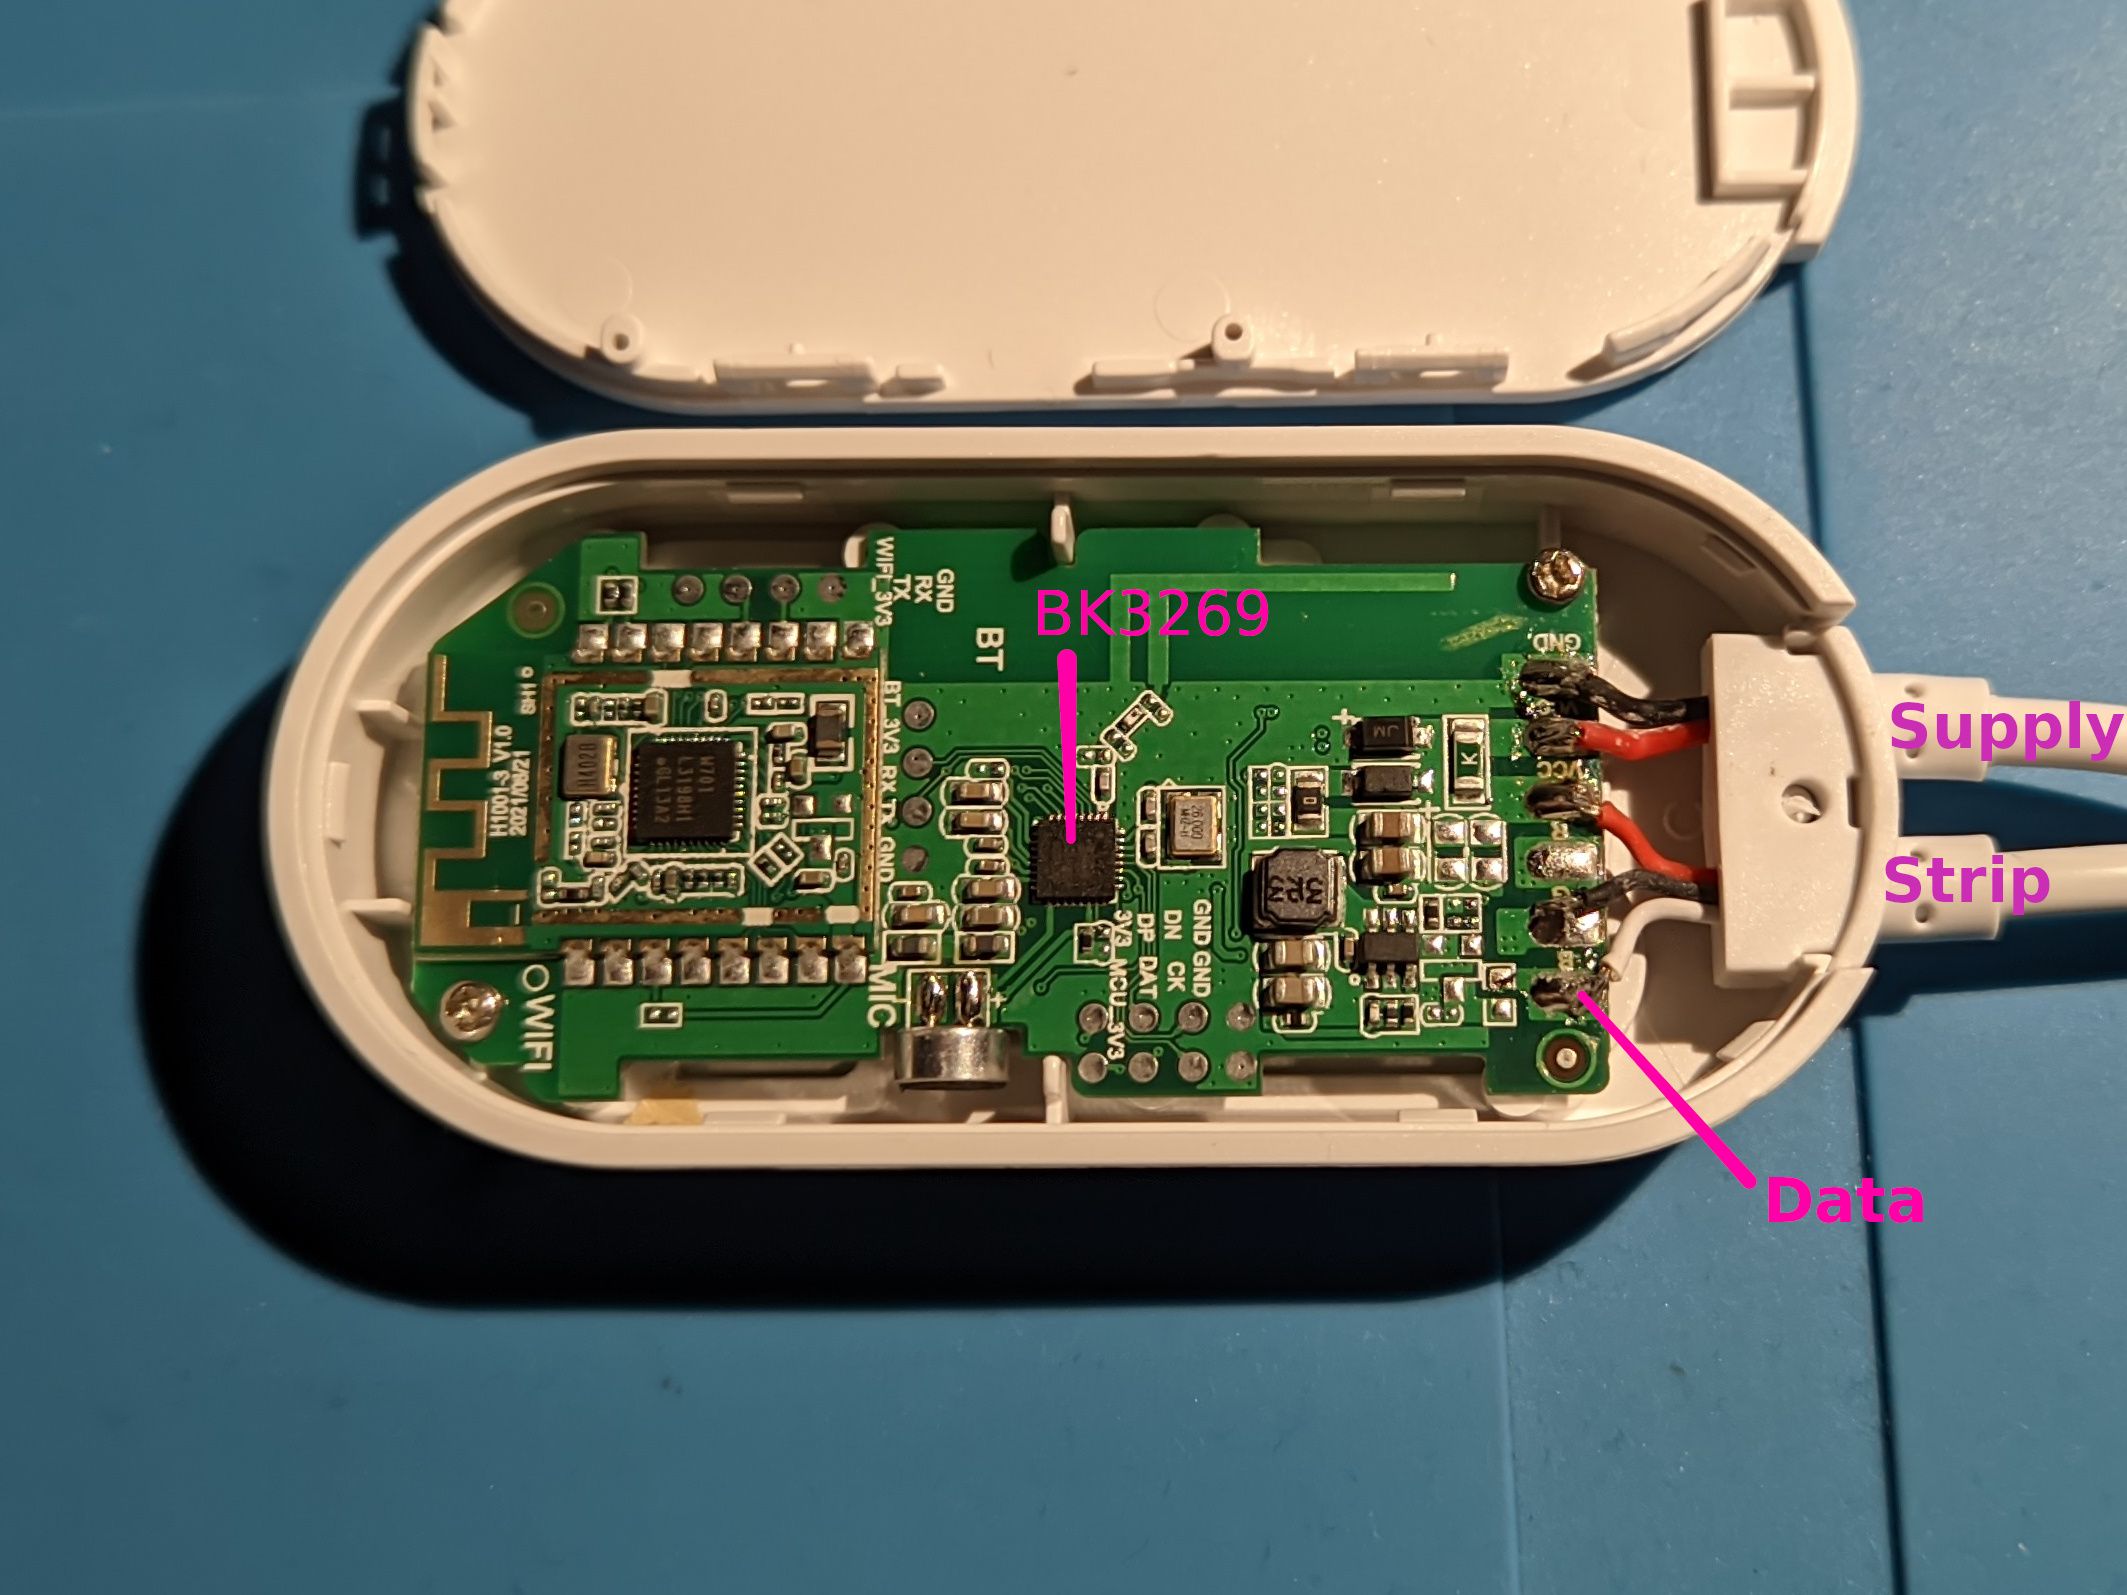 the opened controller case reveals a PCB